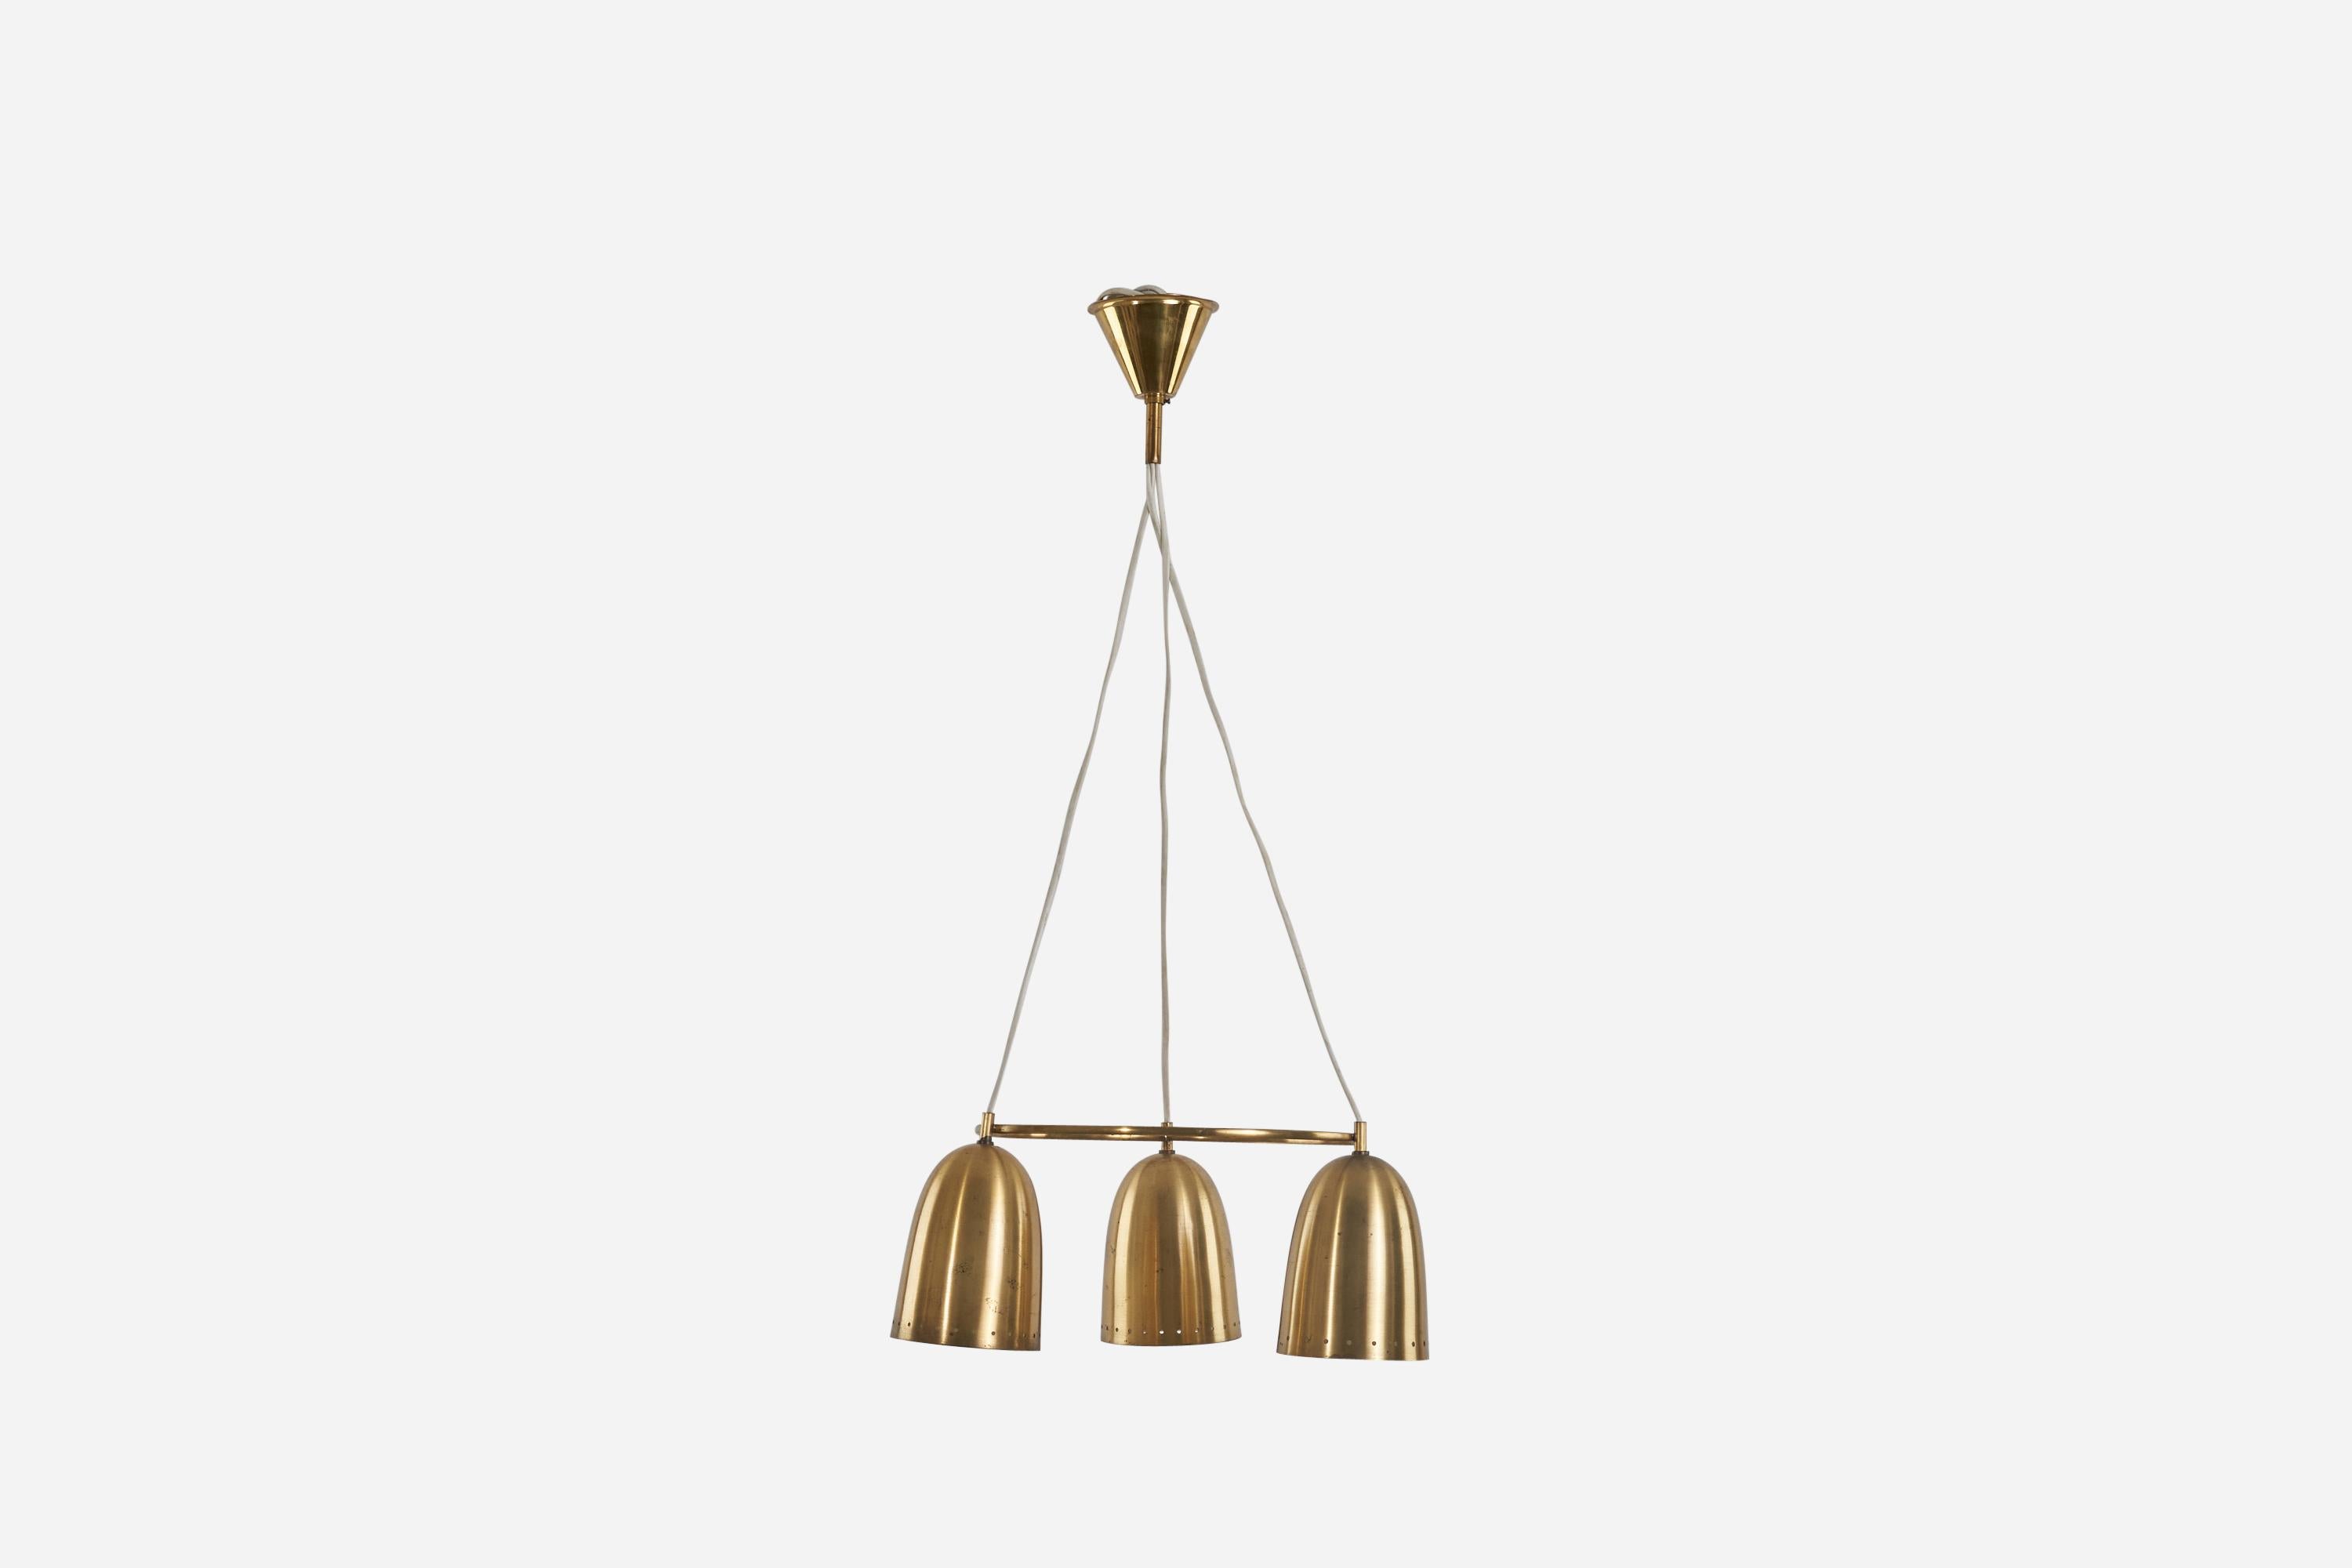 A brass chandelier designed and produced in Denmark, 1940s.

Dimensions variable, measured as illustrated in first image.

Dimensions of Canopy (inches) : 3.10 x 4.22 x 4.22 (height x width x depth)

Socket takes standard E-26 medium base